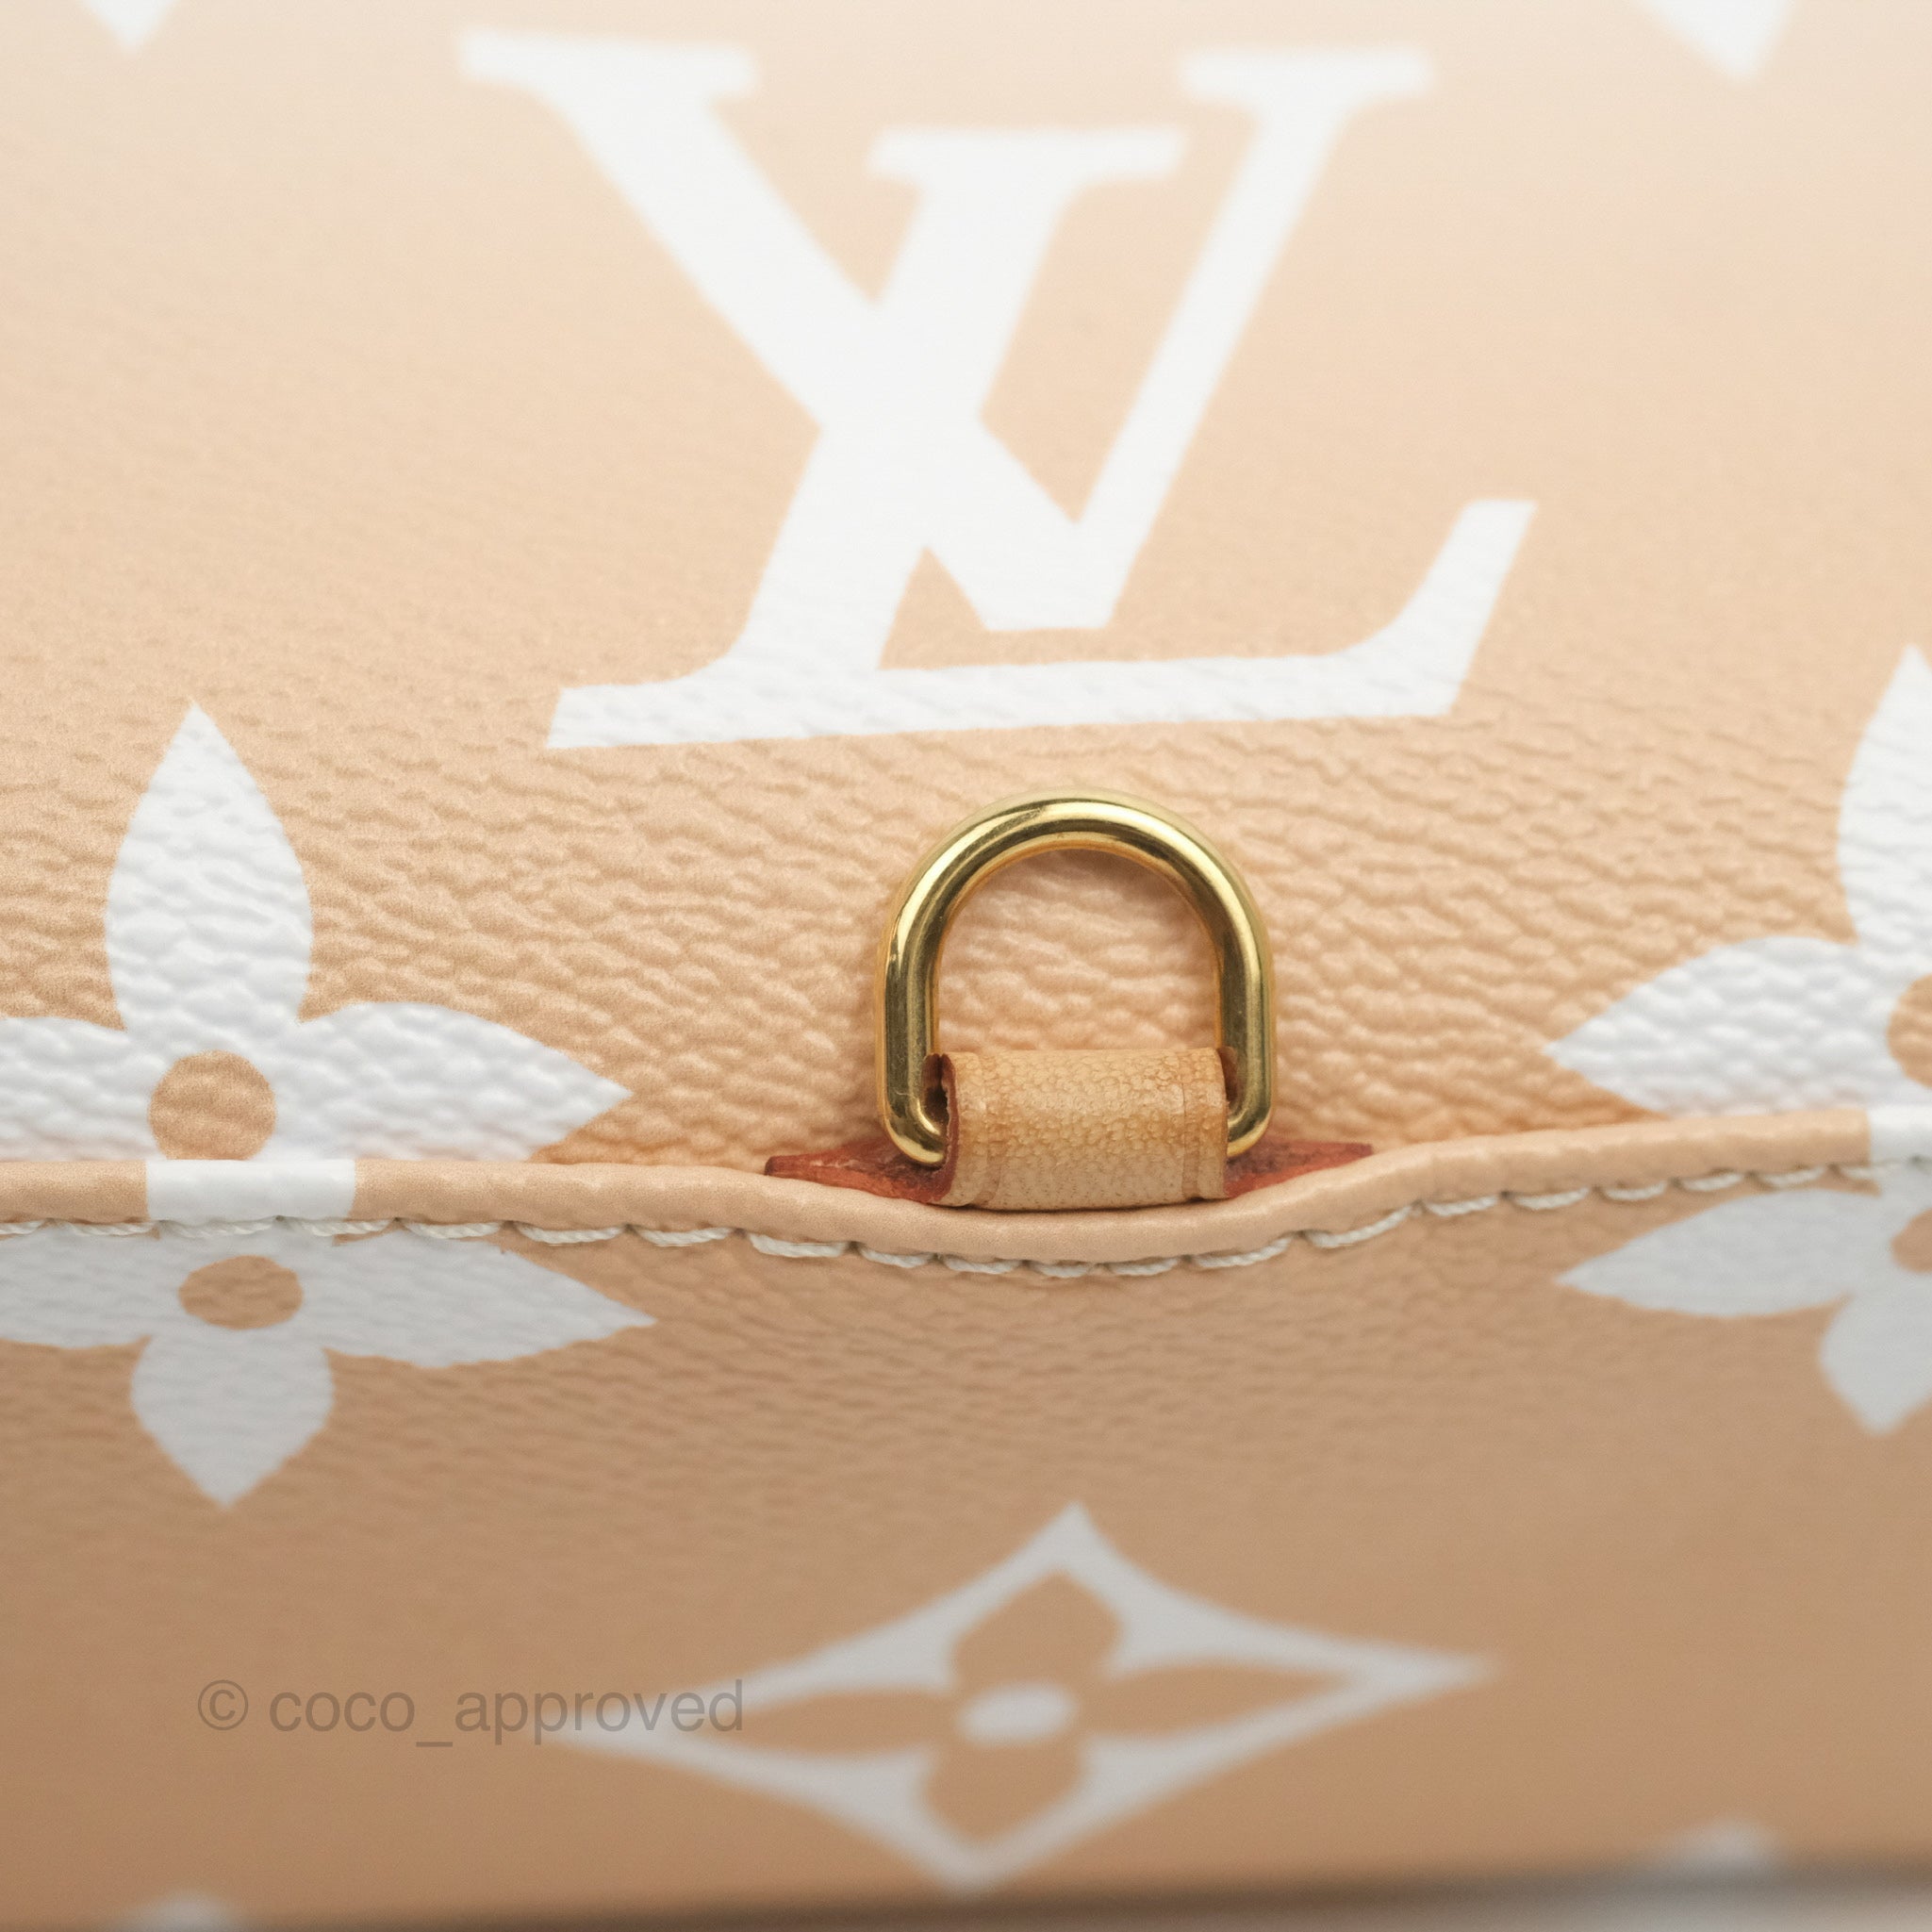 LOUIS VUITTON By the Pool Monogram Giant Tiny Backpack M45764 from Japan